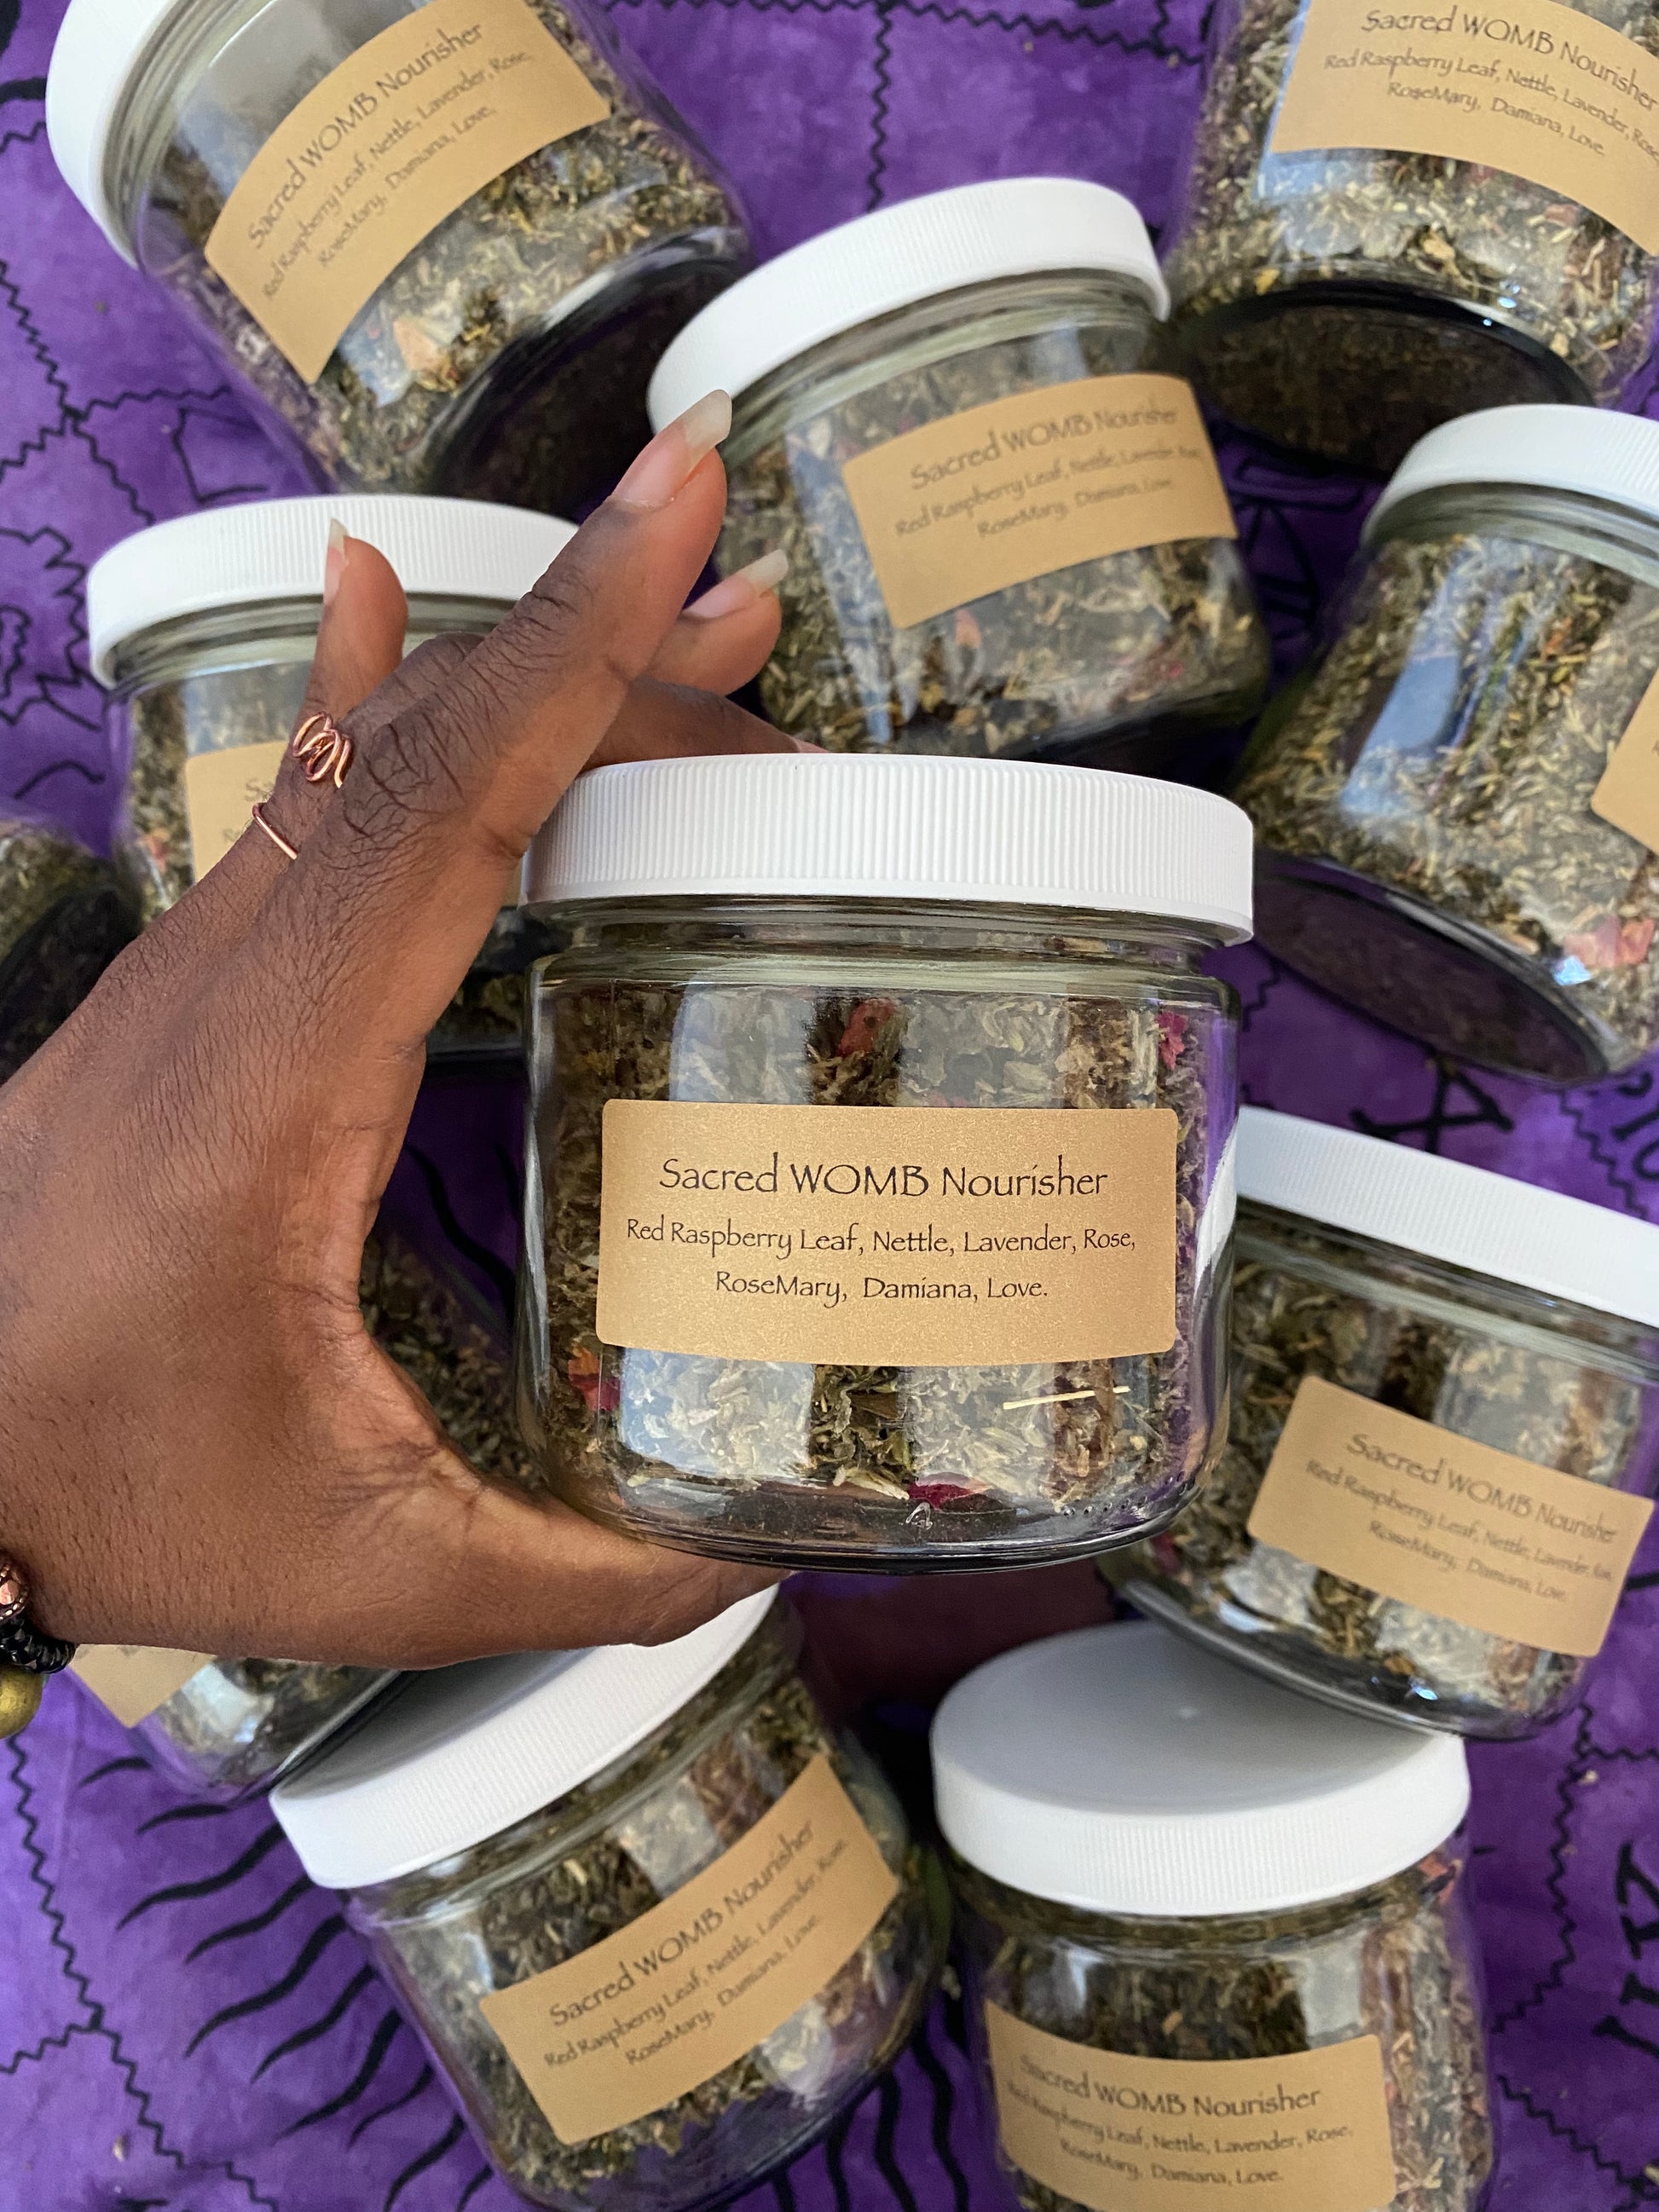 a natural, hand-made loose leaf herbal tea blend held in a glass bottle. these blends are potent and the colors of the herbs are red and green.